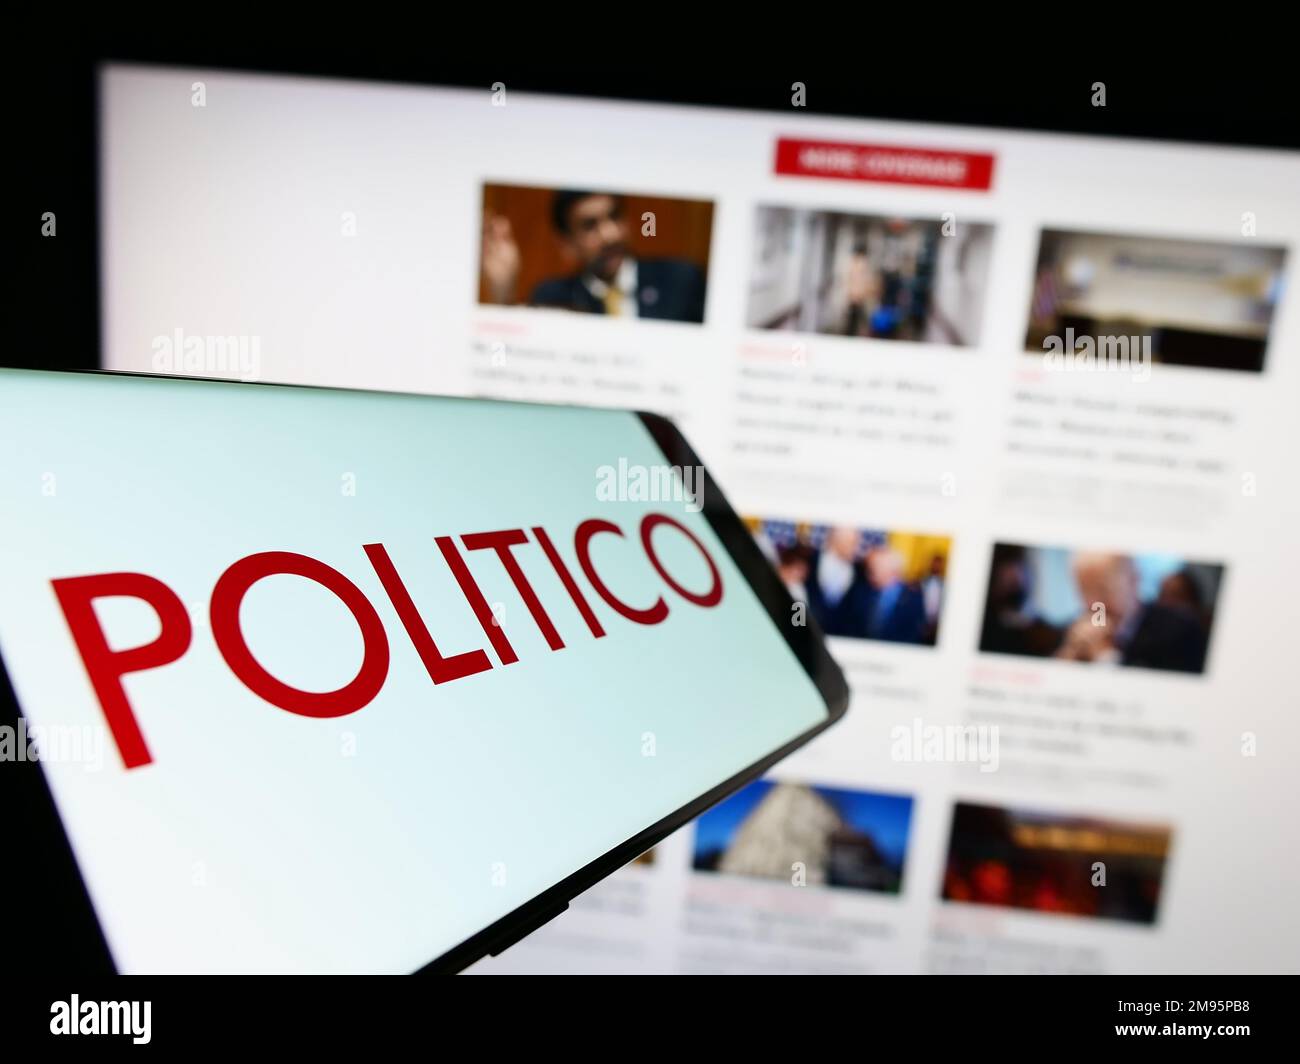 Cellphone with logo of American political newspaper company Politico LLC on screen in front of website. Focus on center-left of phone display. Stock Photo